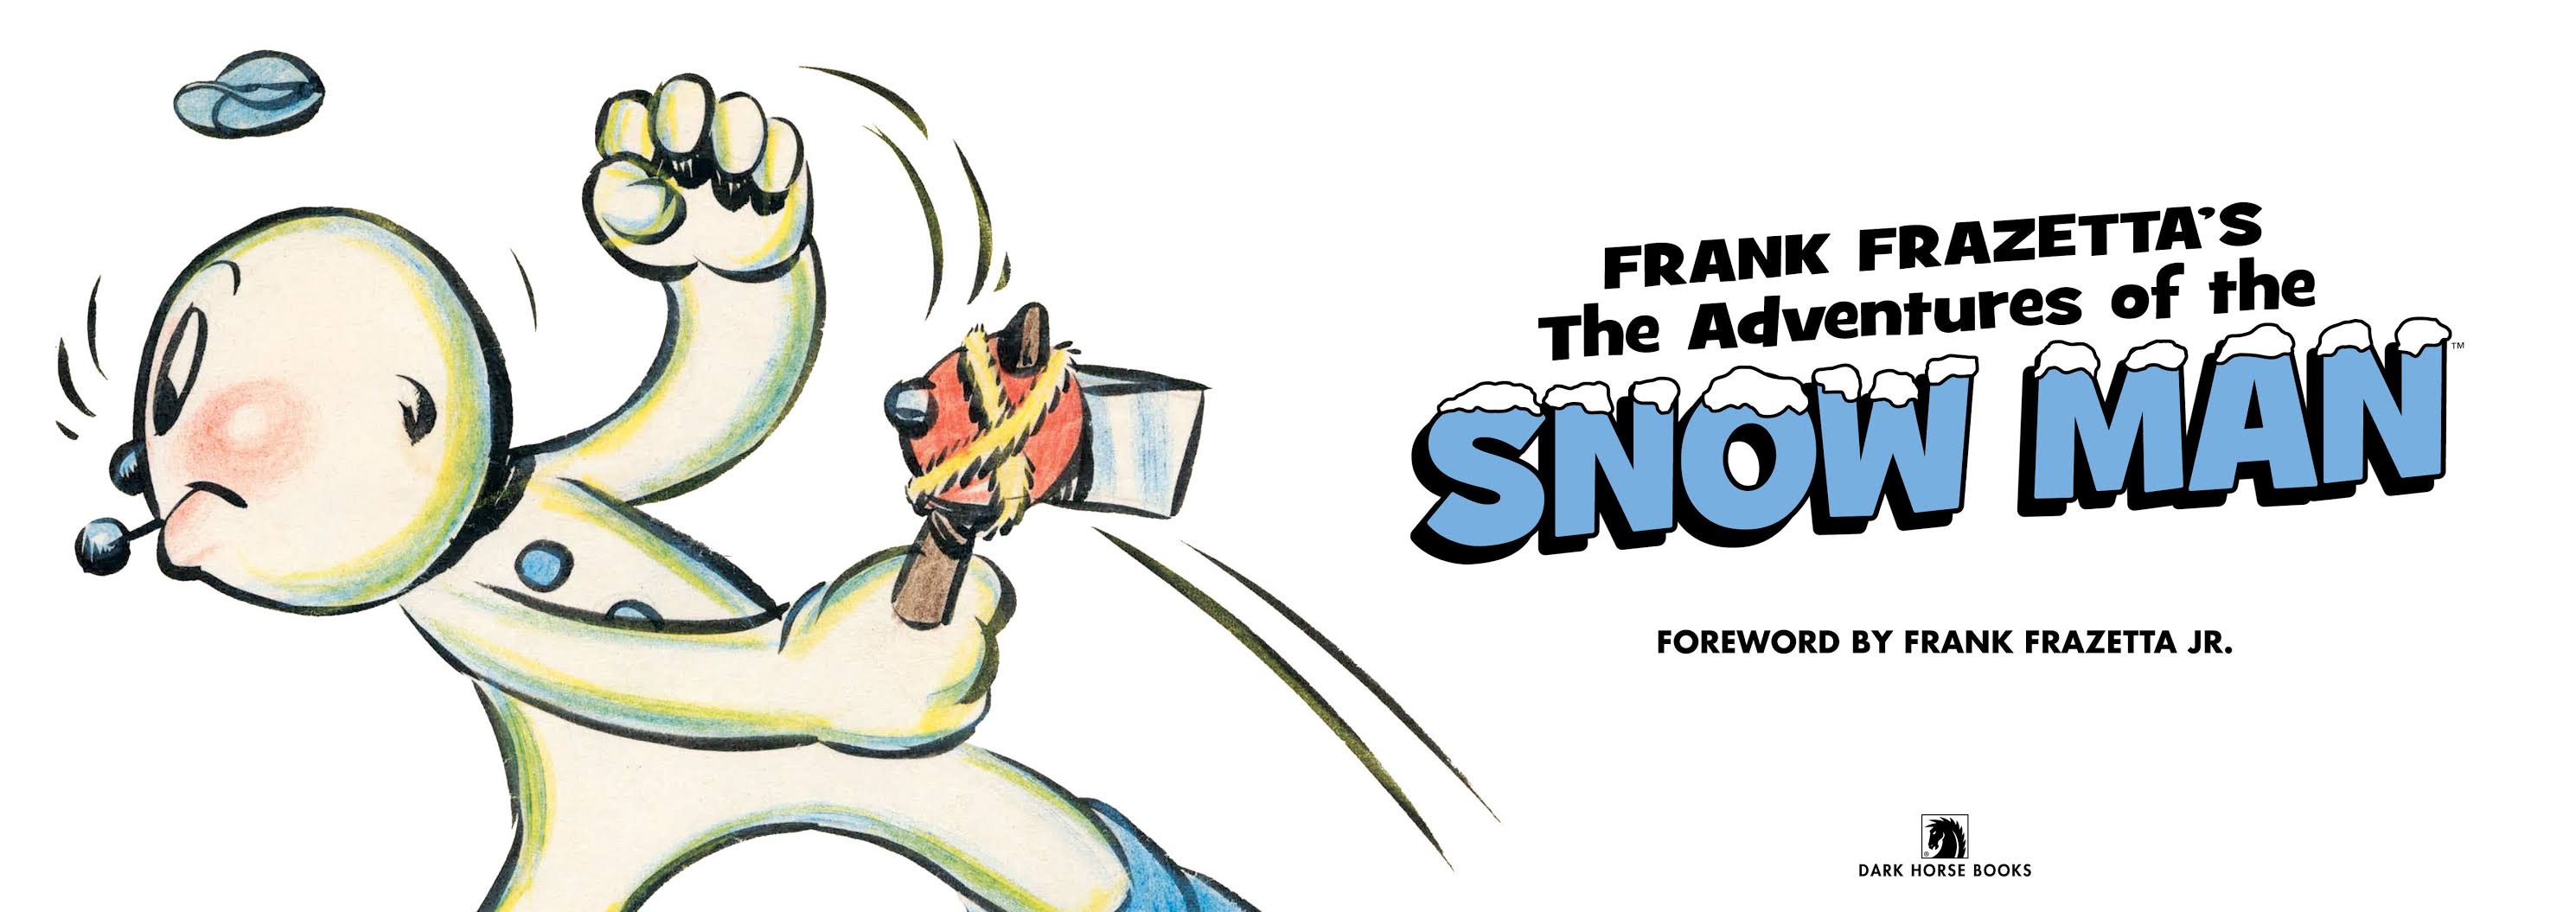 Read online Frank Frazetta's The Adventures of the Snow Man comic -  Issue # TPB - 4